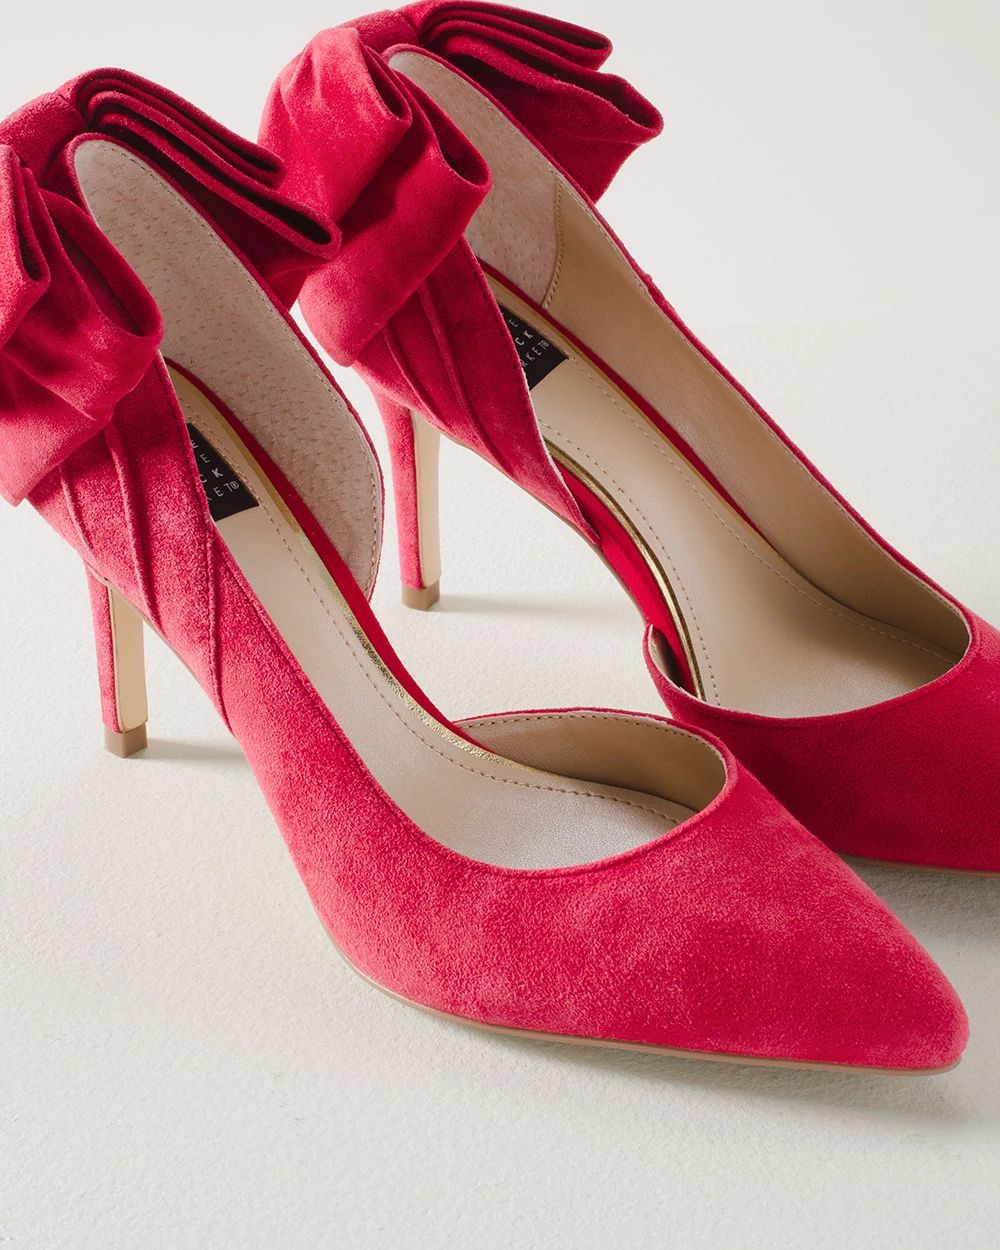 Red Suede Bow Back Pumps click to view larger image.